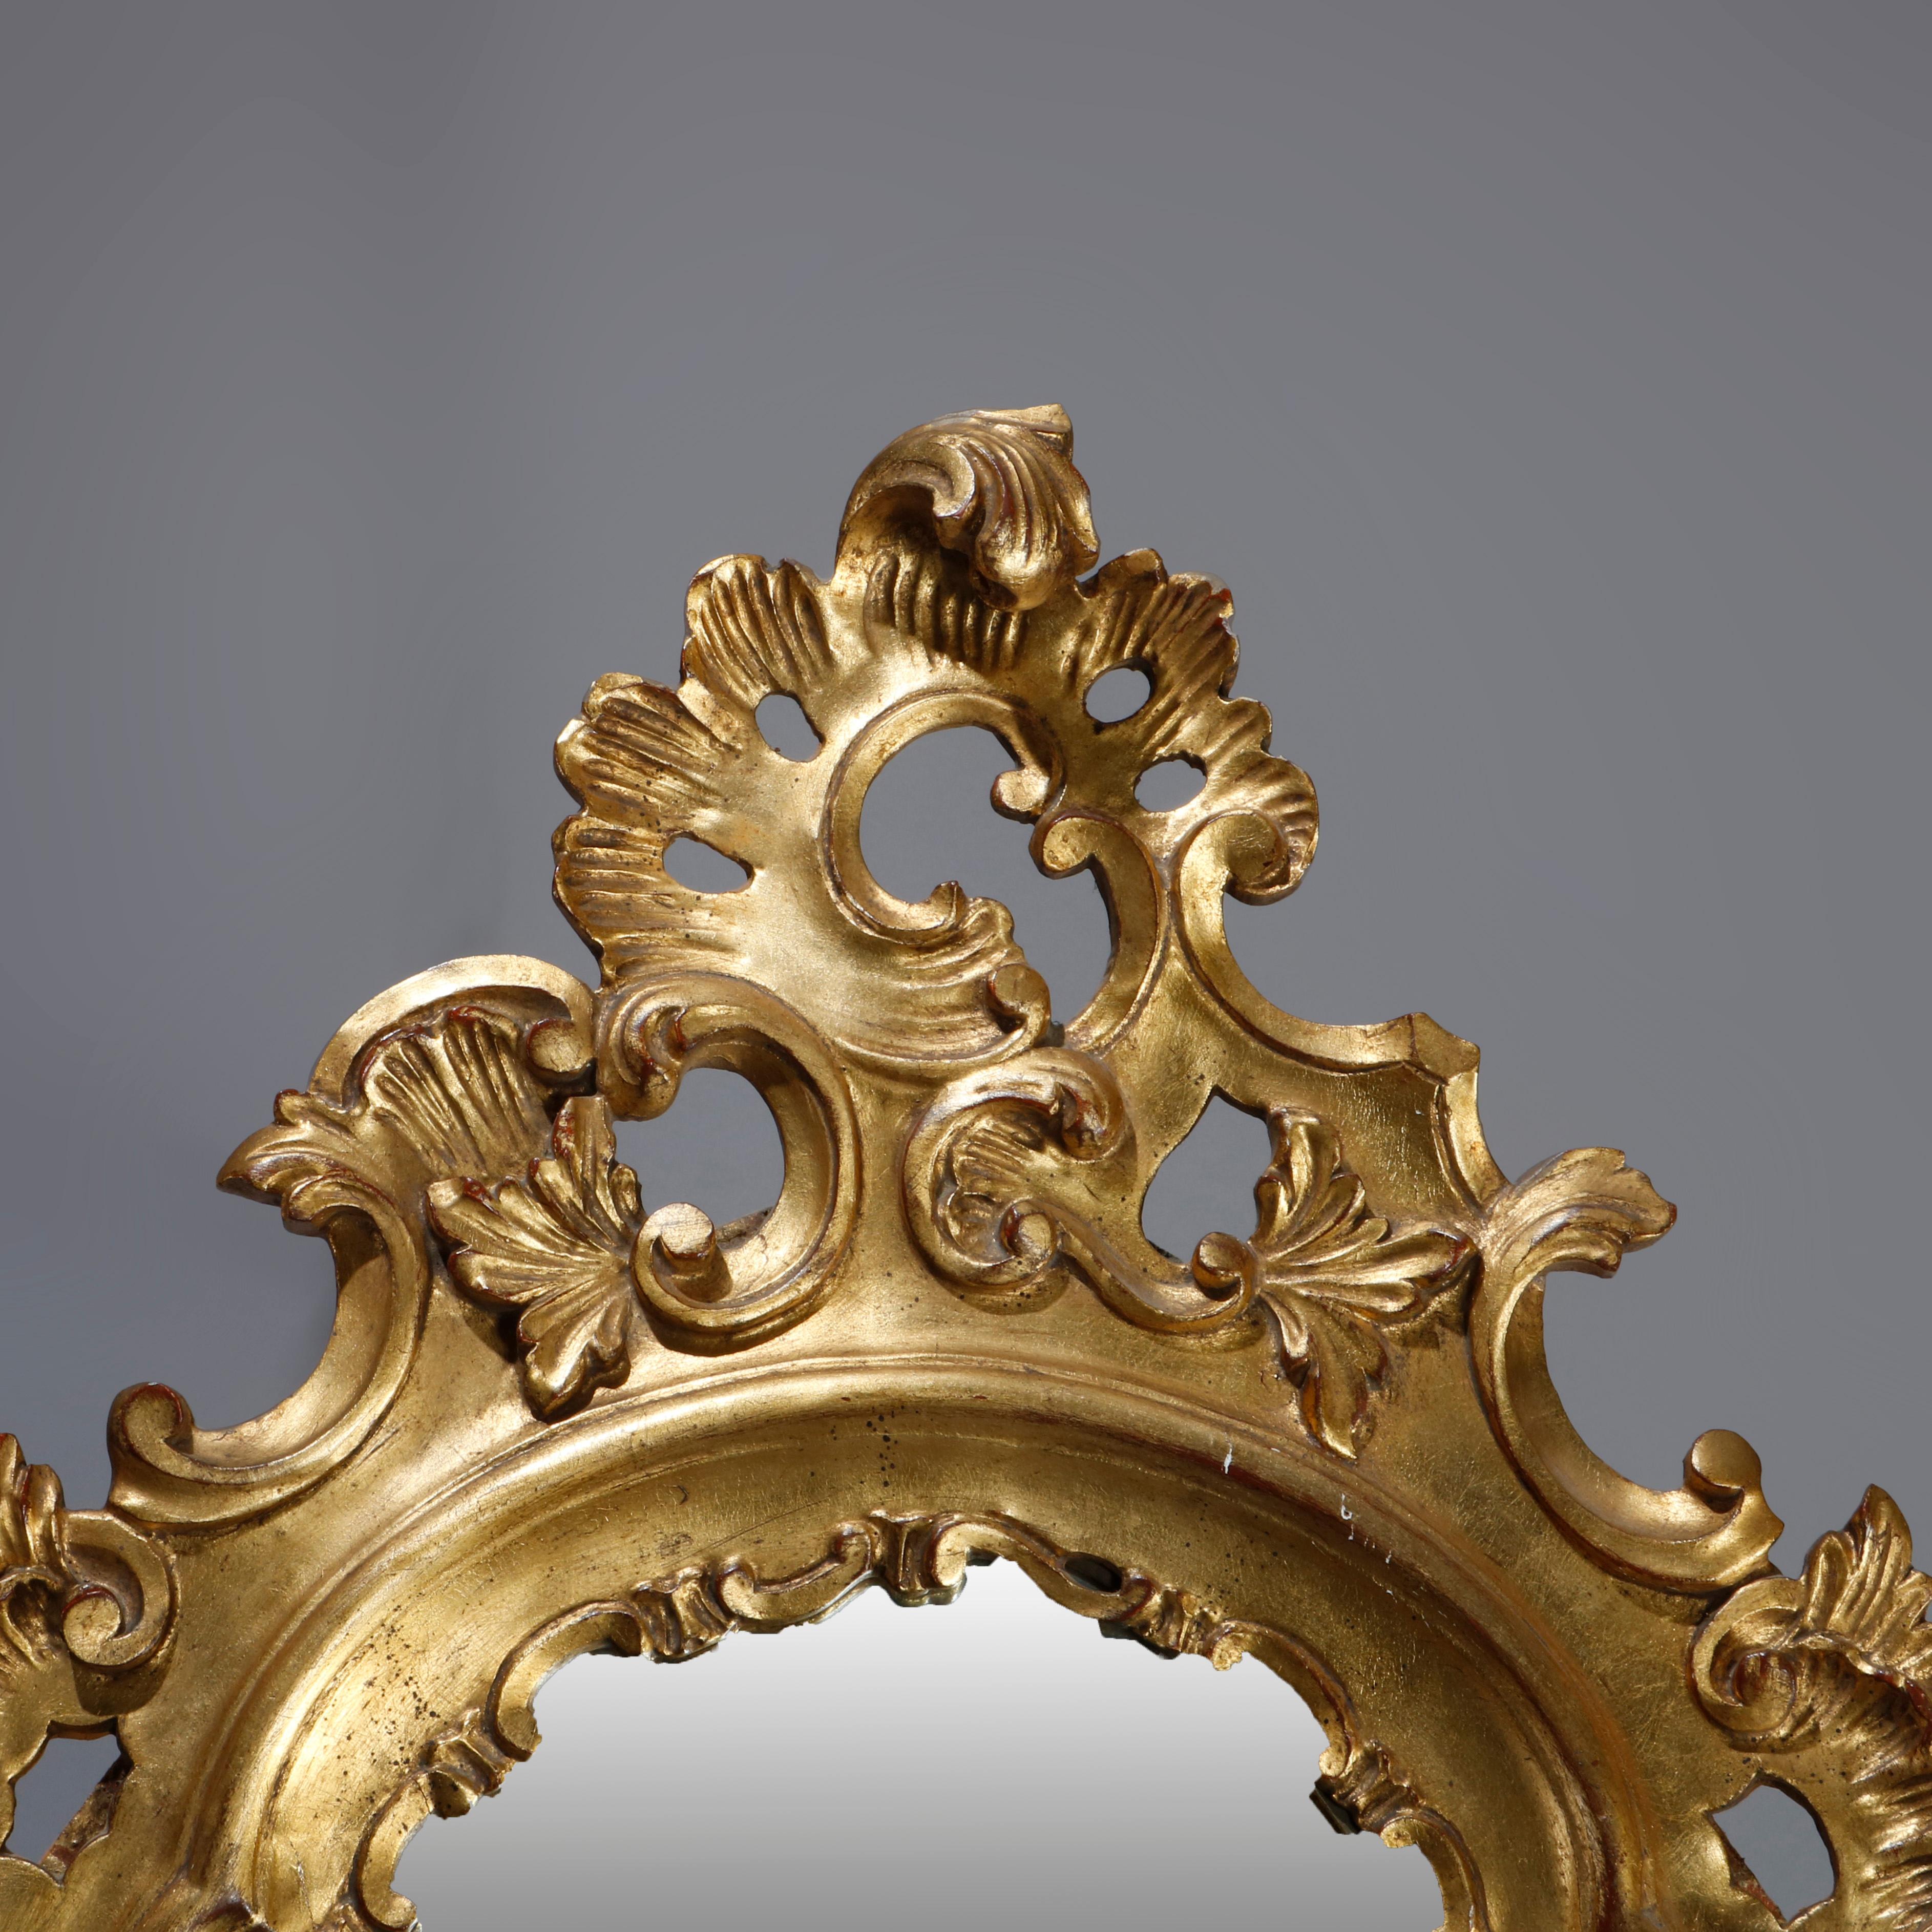 An oversized French Rococo wall mirror offers pierced giltwood frame with crest having central gadroon cartouche with flanking scroll and foliate elements surmounting shaped mirror, 20th century

***DELIVERY NOTICE – Due to COVID-19 we are employing